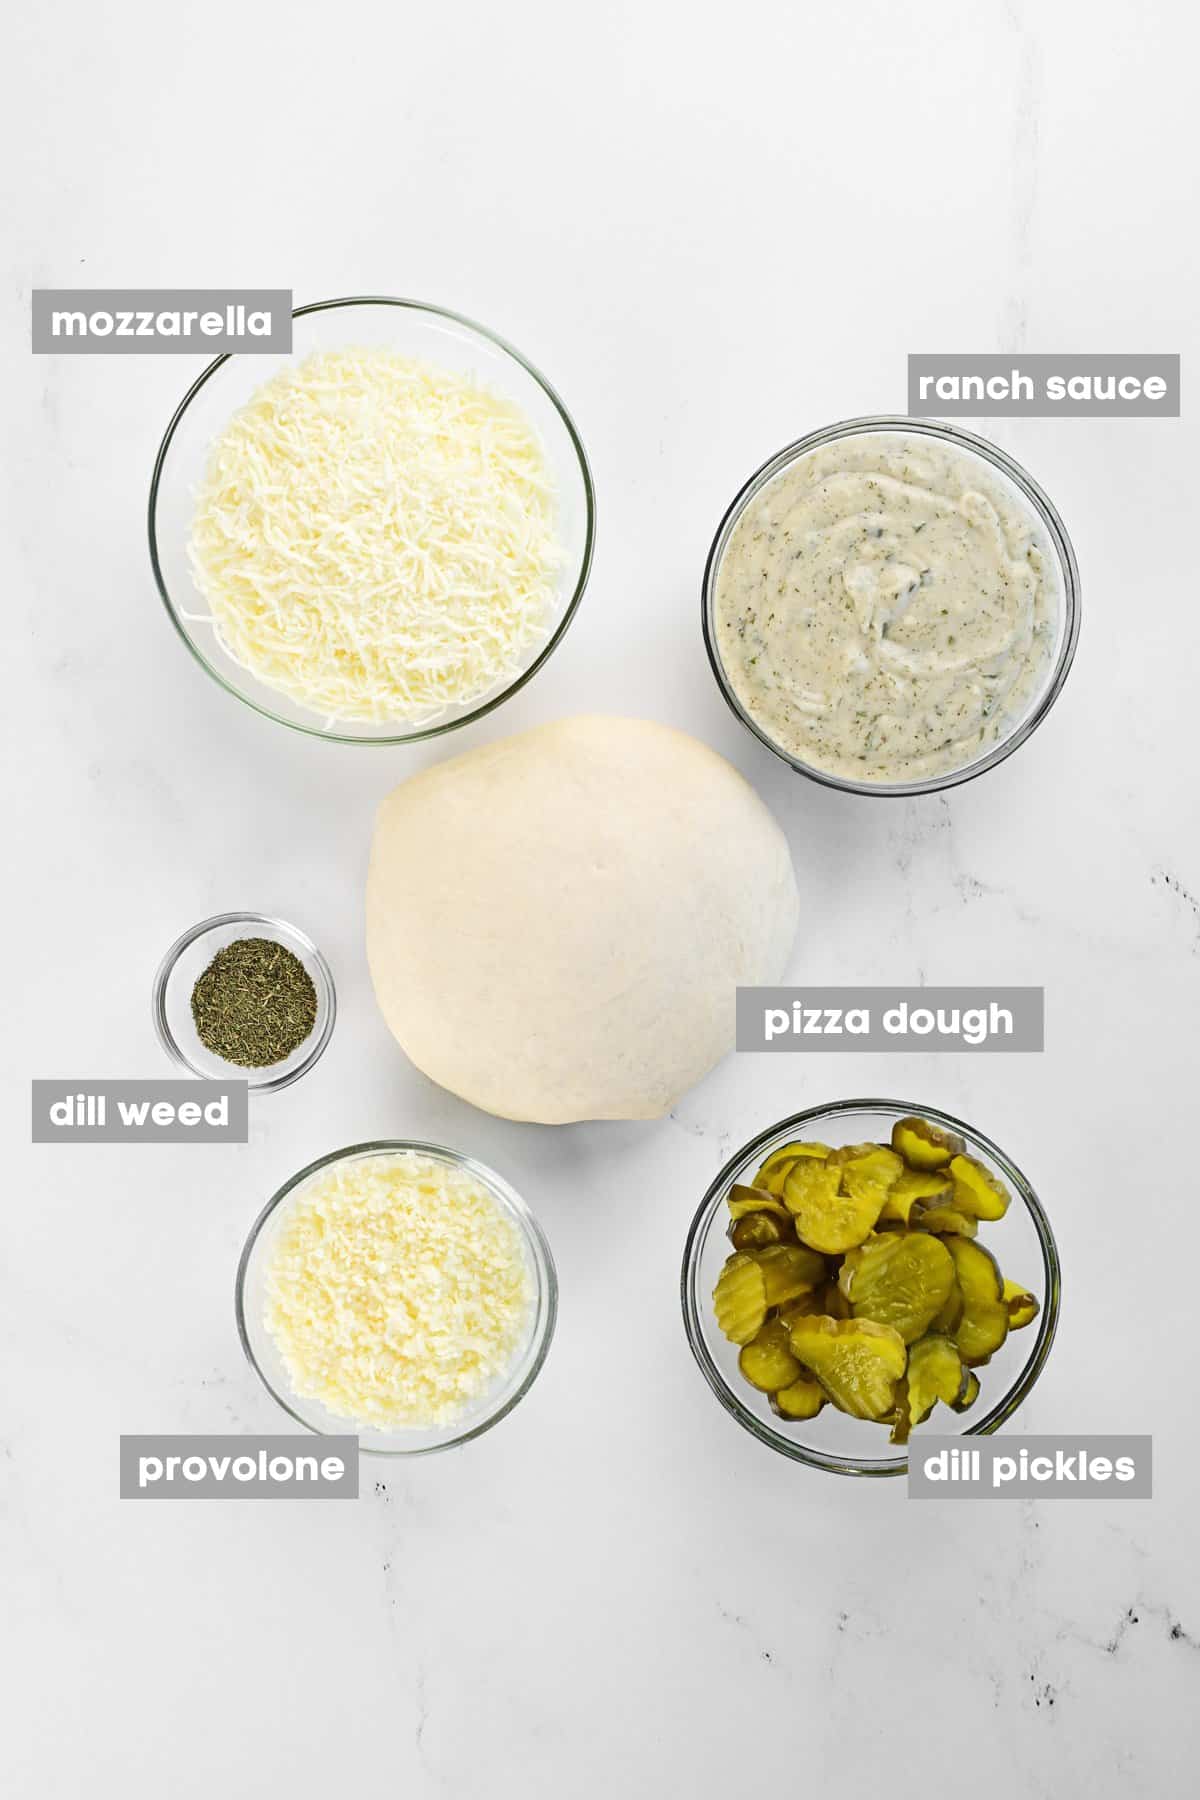 Dough and ingredients in bowls on a marble countertop.